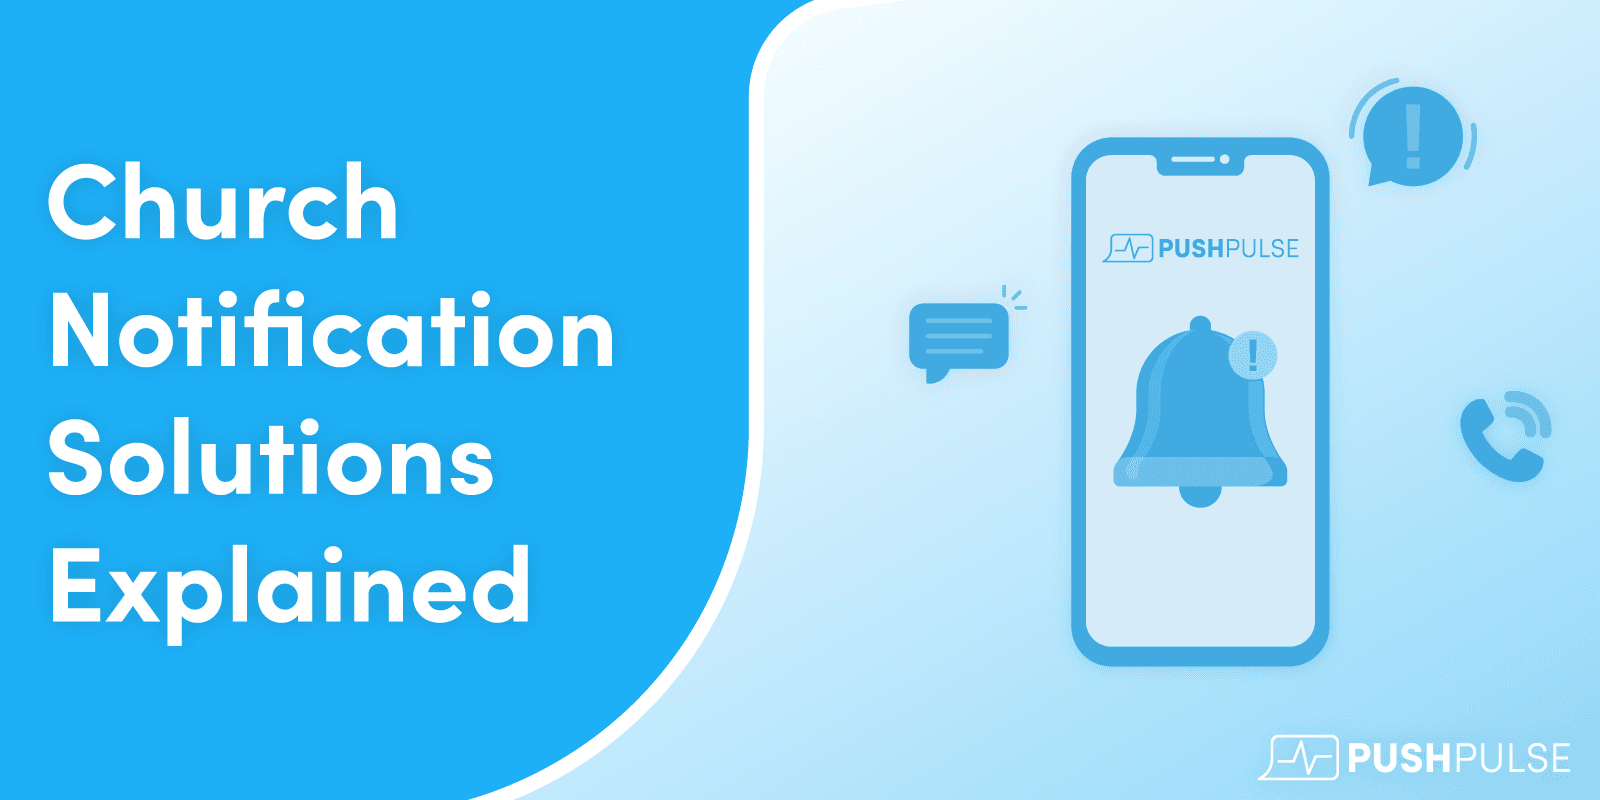 Cover Image for Church Notification Solutions Explained